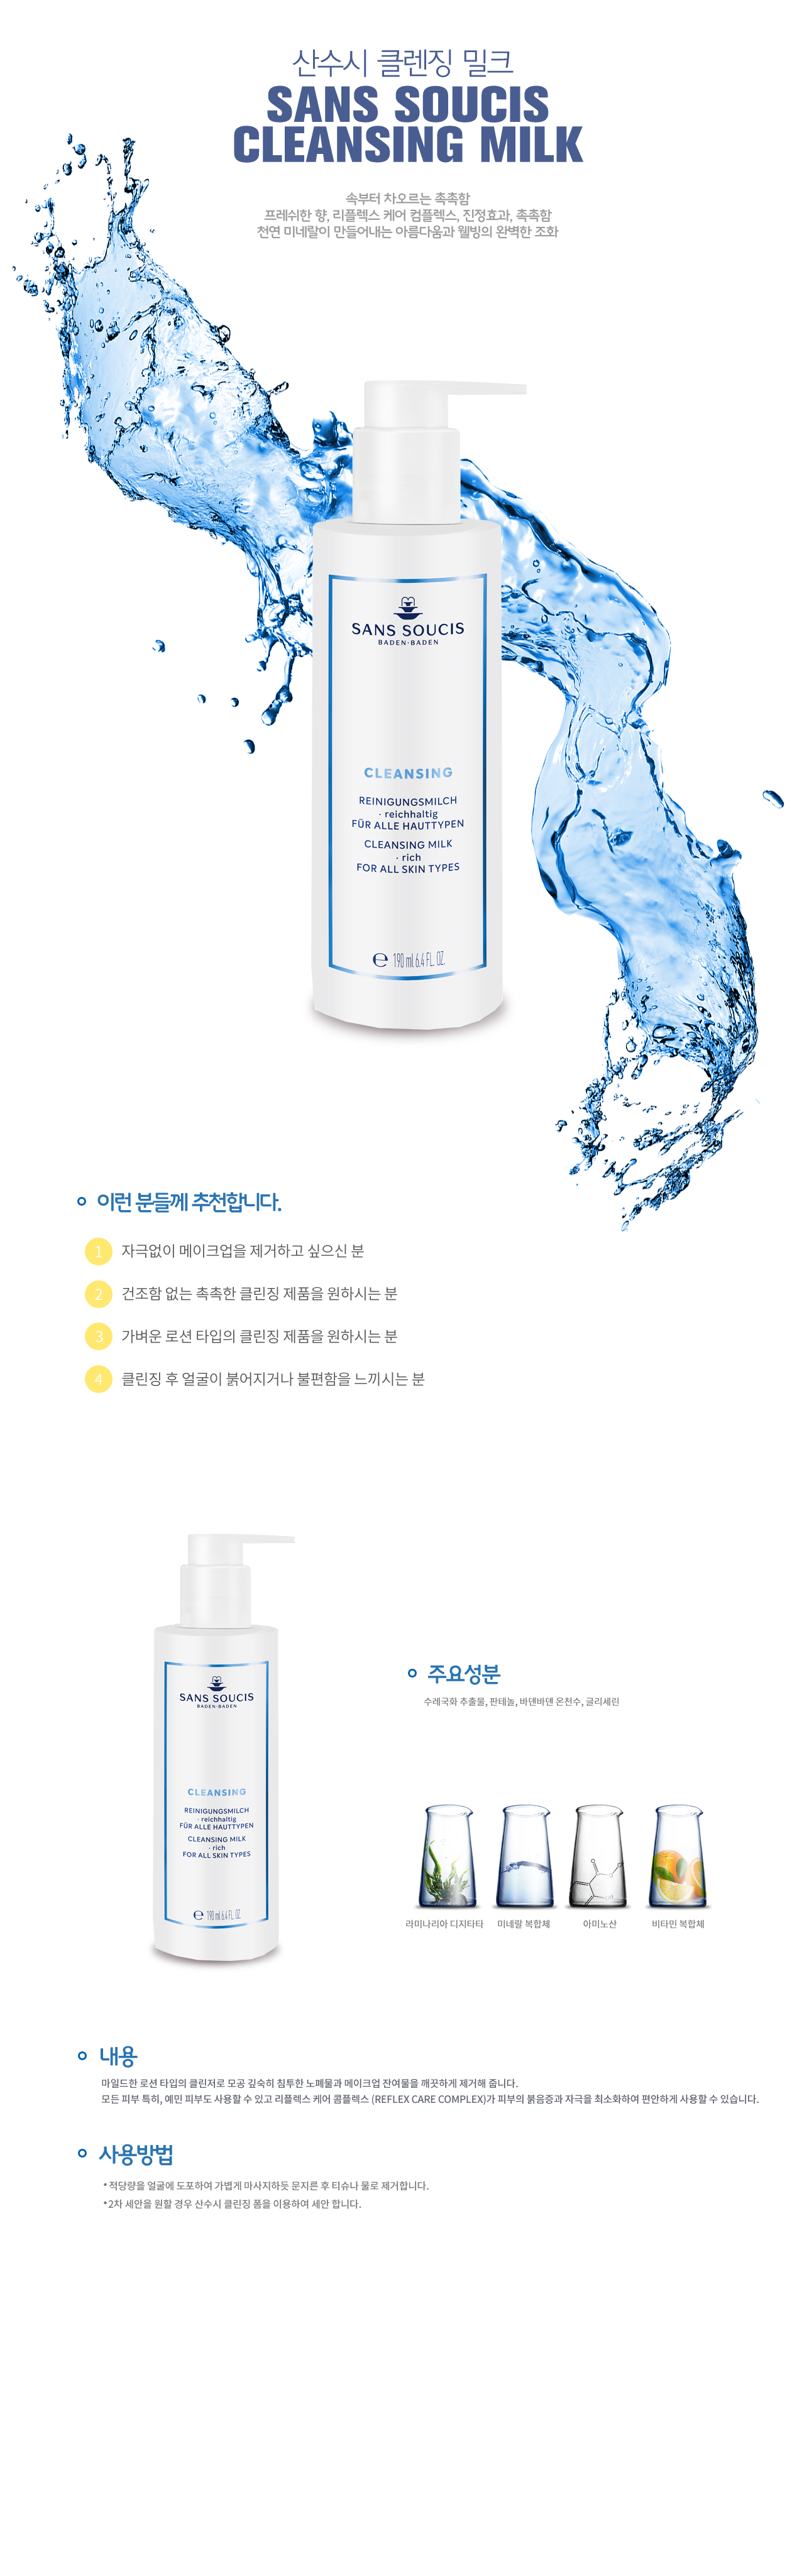 ssc_cleansing_milk_190ml_02.png